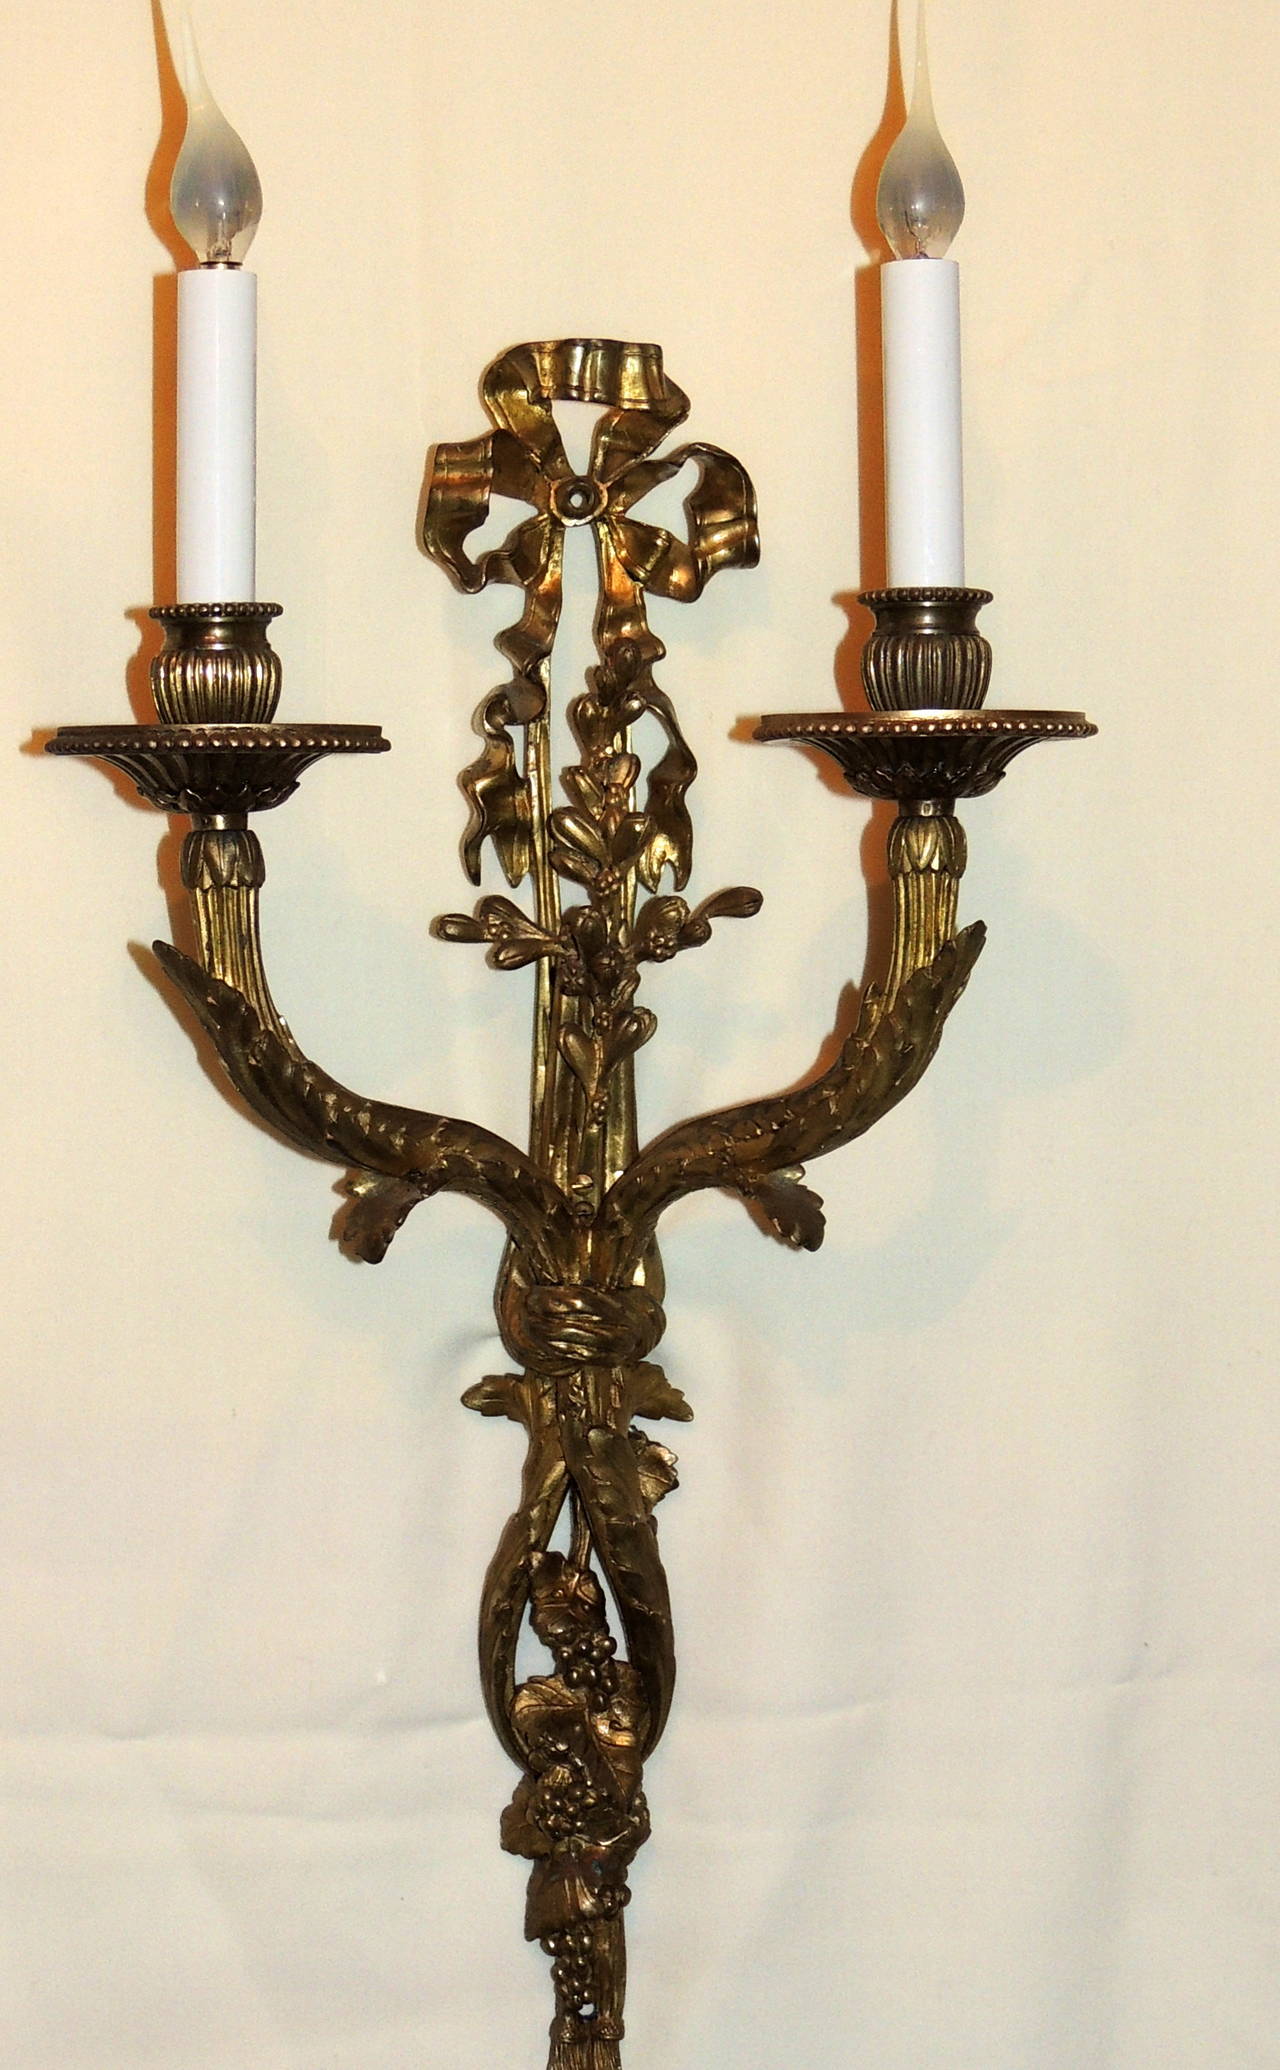 These elegant bow top sconces are early 20th century antique bronze with a wonderful aged patina. The bow with the cascading ribbons entwining the beautiful floral filigree and seed detail along both arms and the centre finish with the tassels at